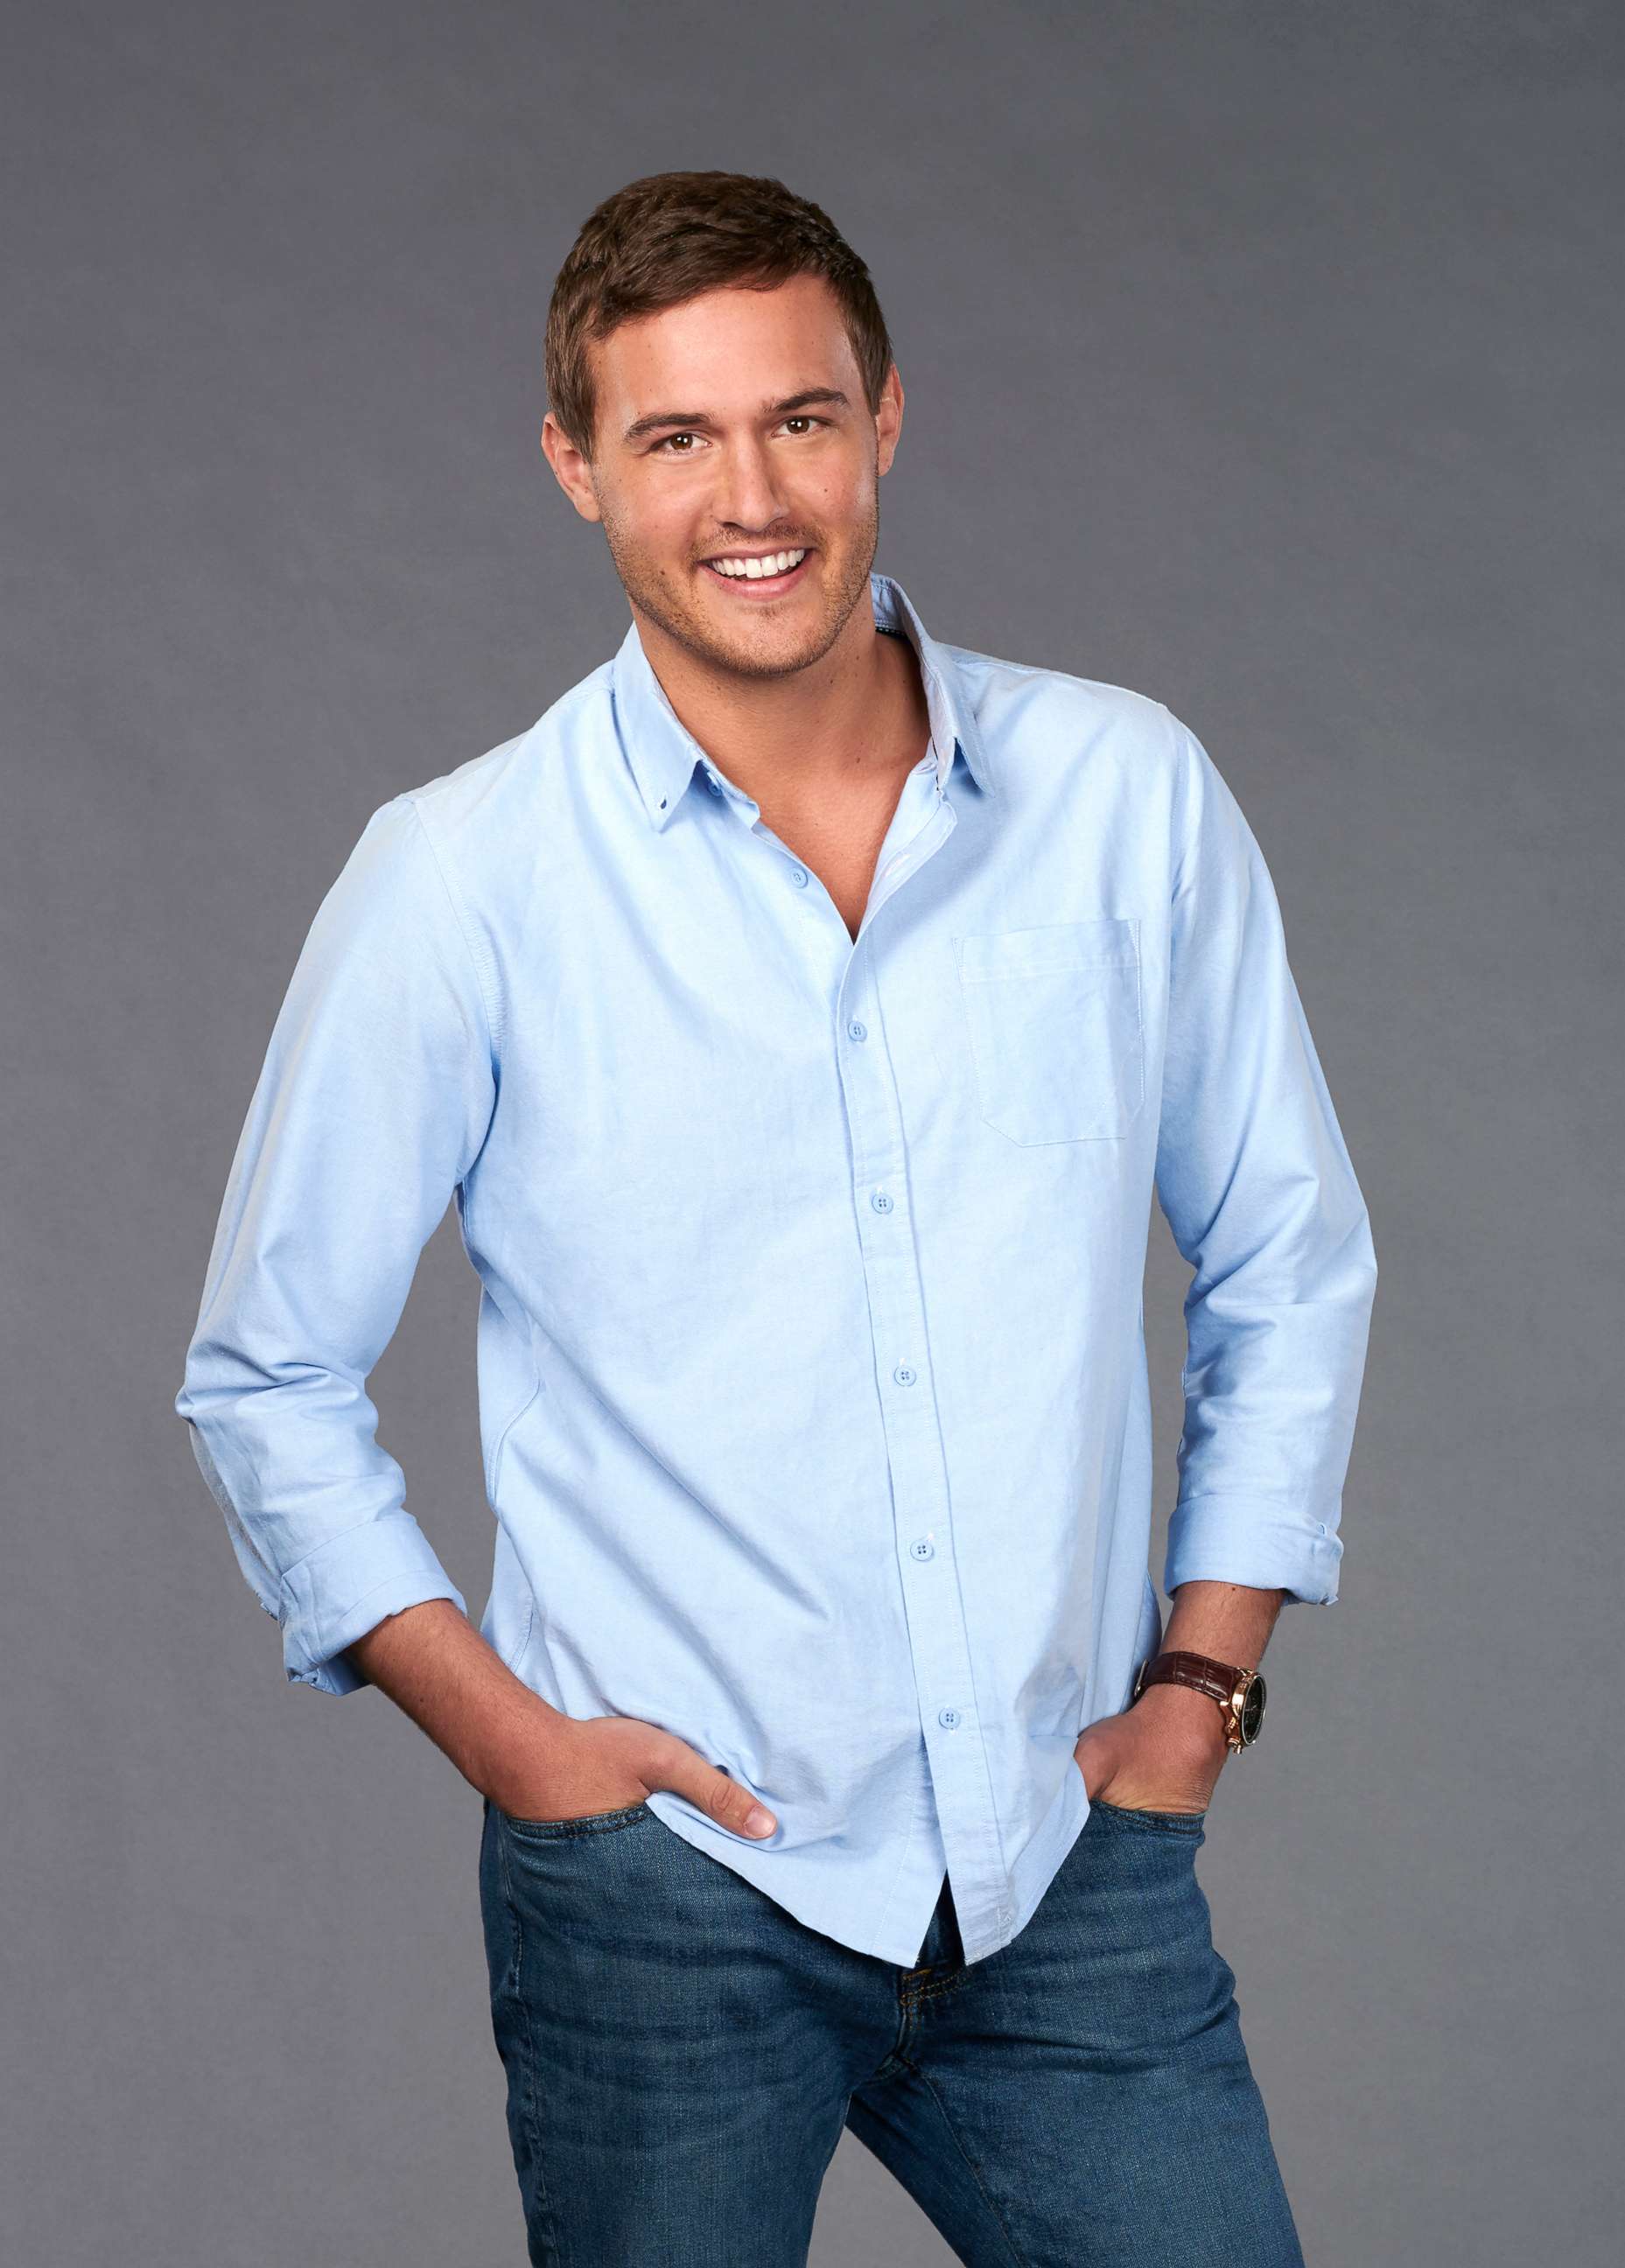 PHOTO: In this undated photo, Peter, a contestant on the 15th season of "The Bachelorette" is shown.